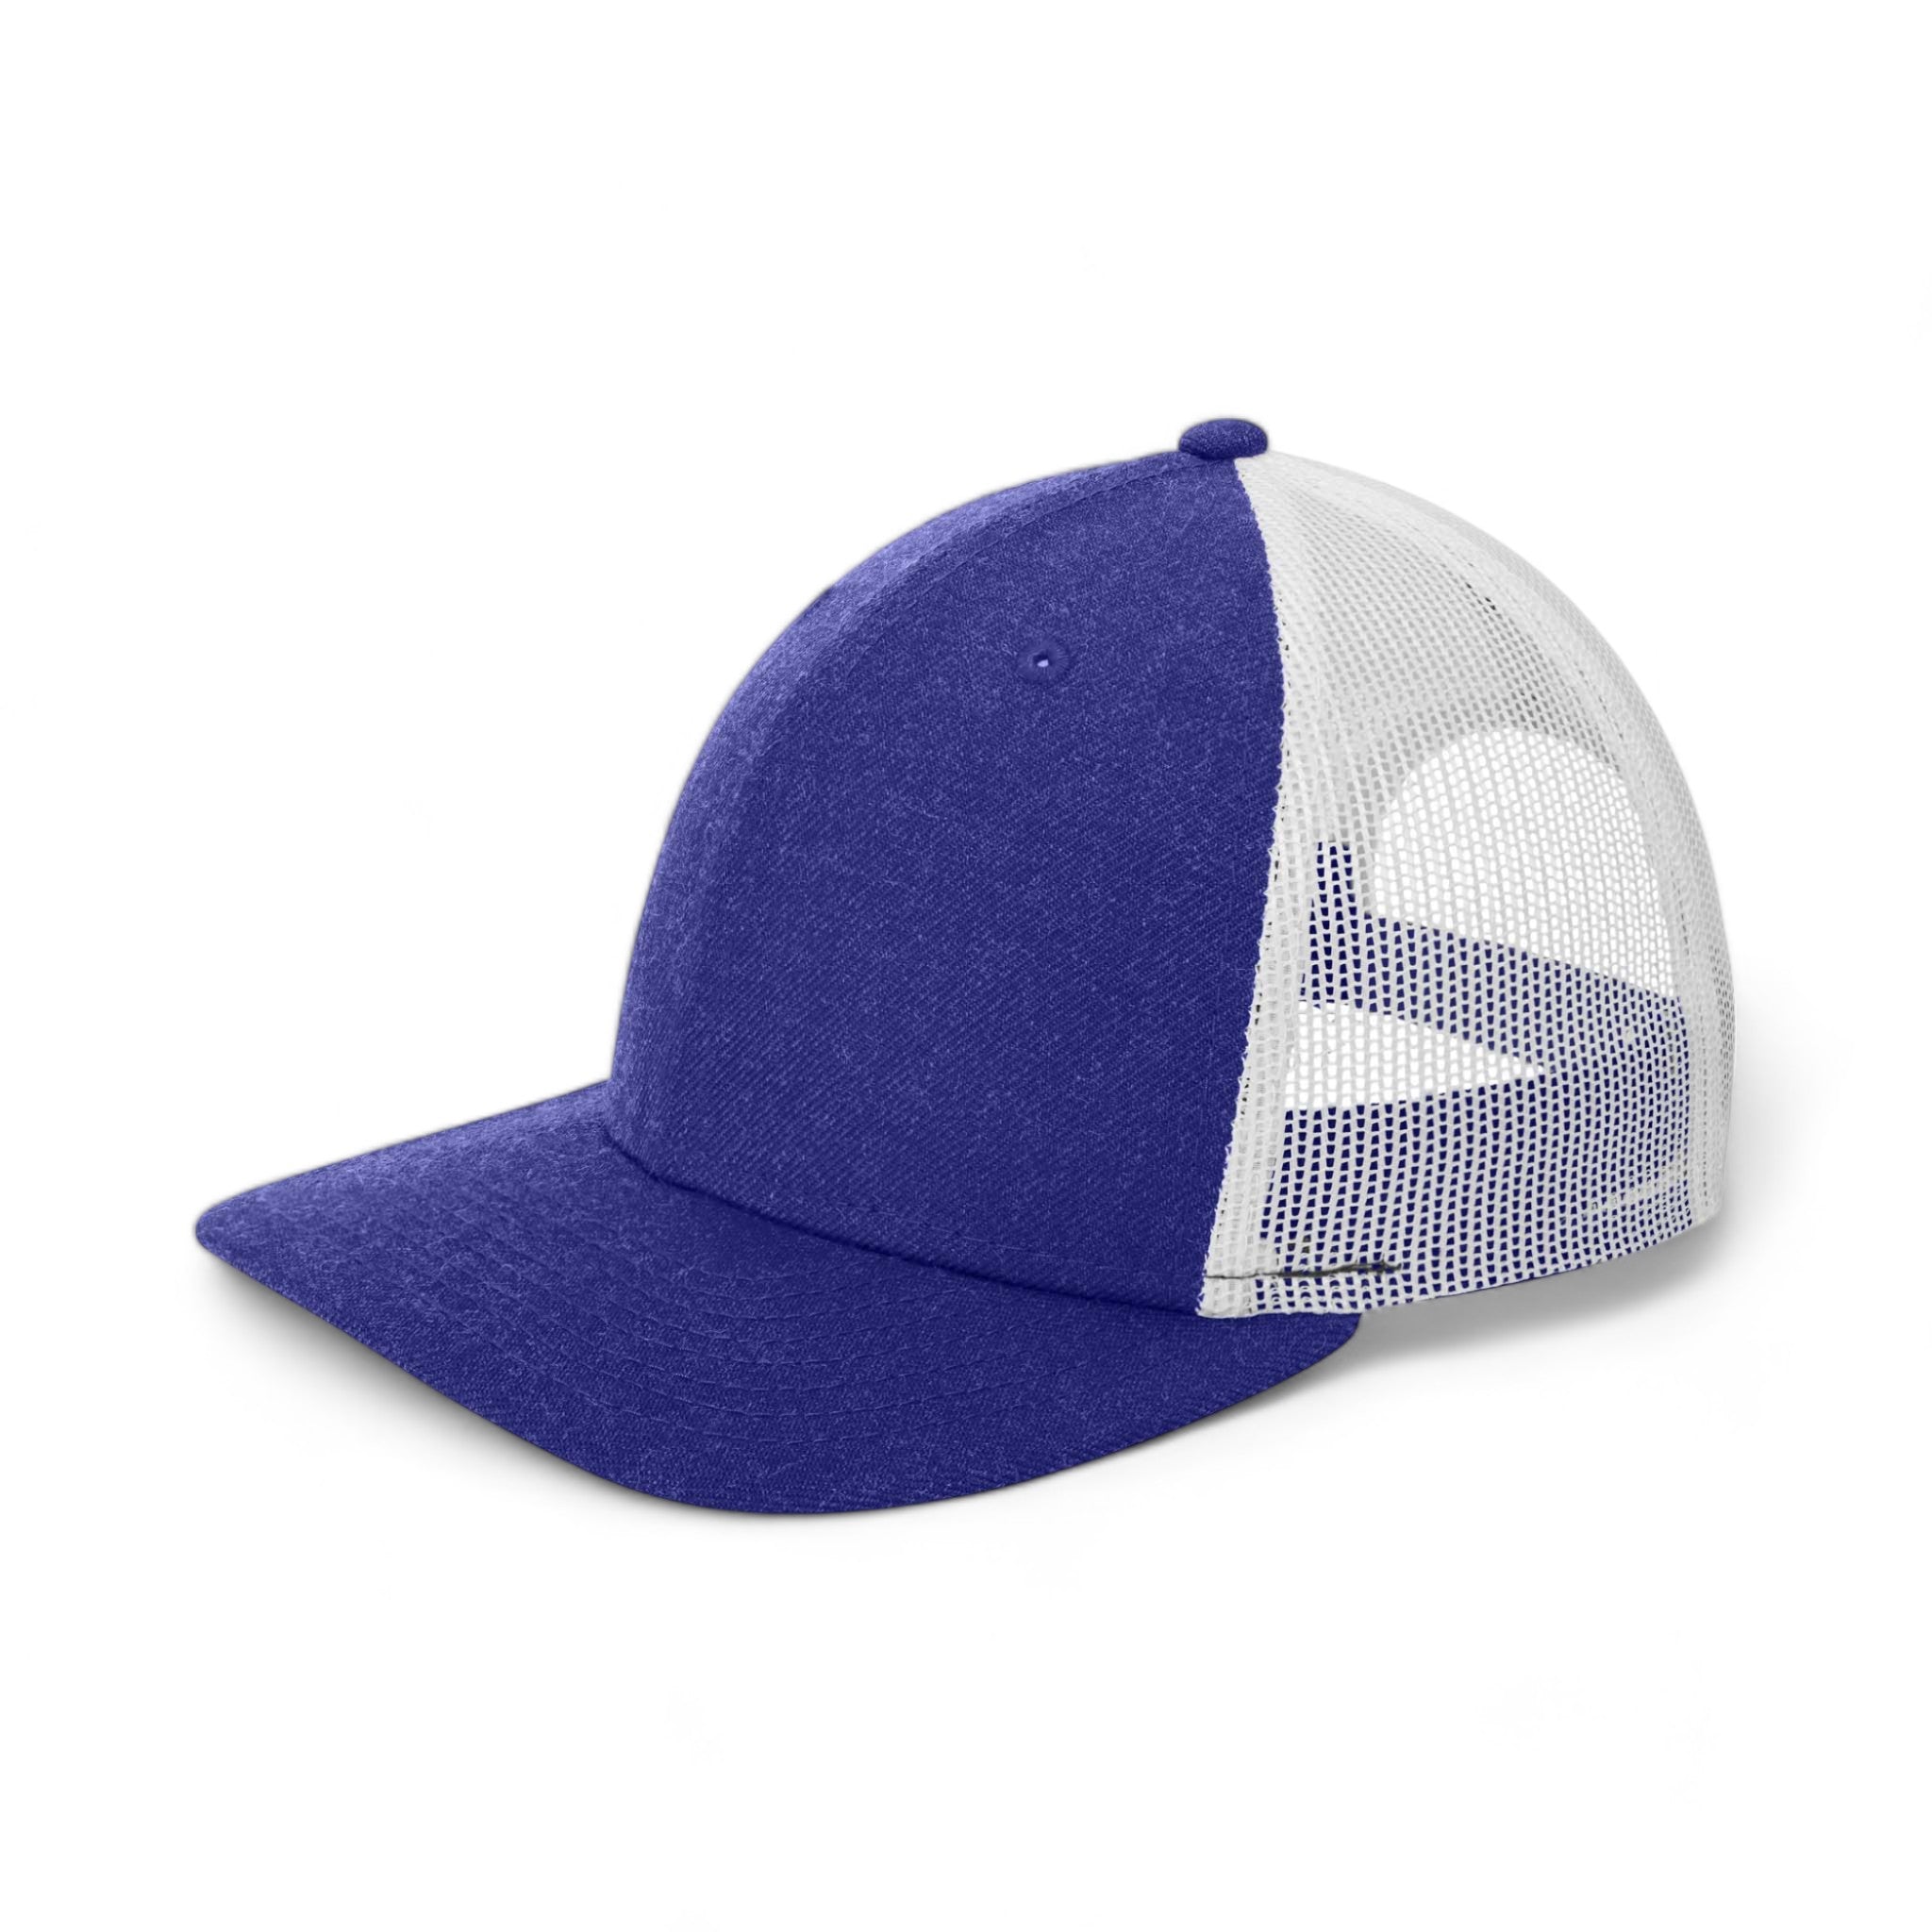 Side view of New Era NE207 custom hat in heather royal and white